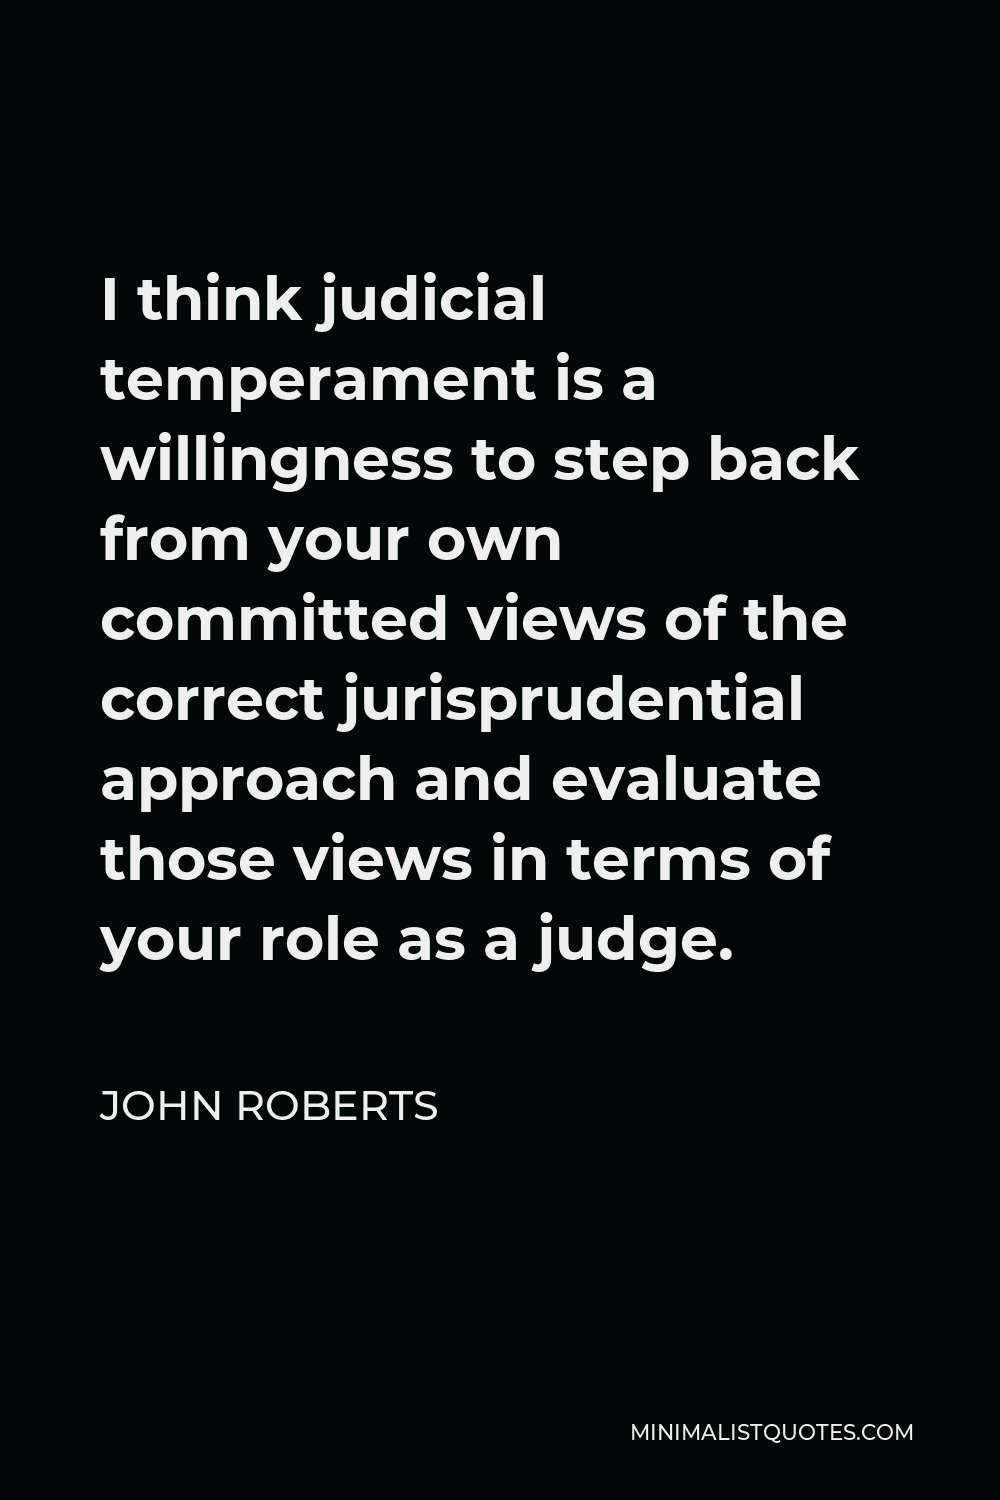 John Roberts Quote - I think judicial temperament is a willingness to step back from your own committed views of the correct jurisprudential approach and evaluate those views in terms of your role as a judge. It’s the difference between being a judge and being a law professor.